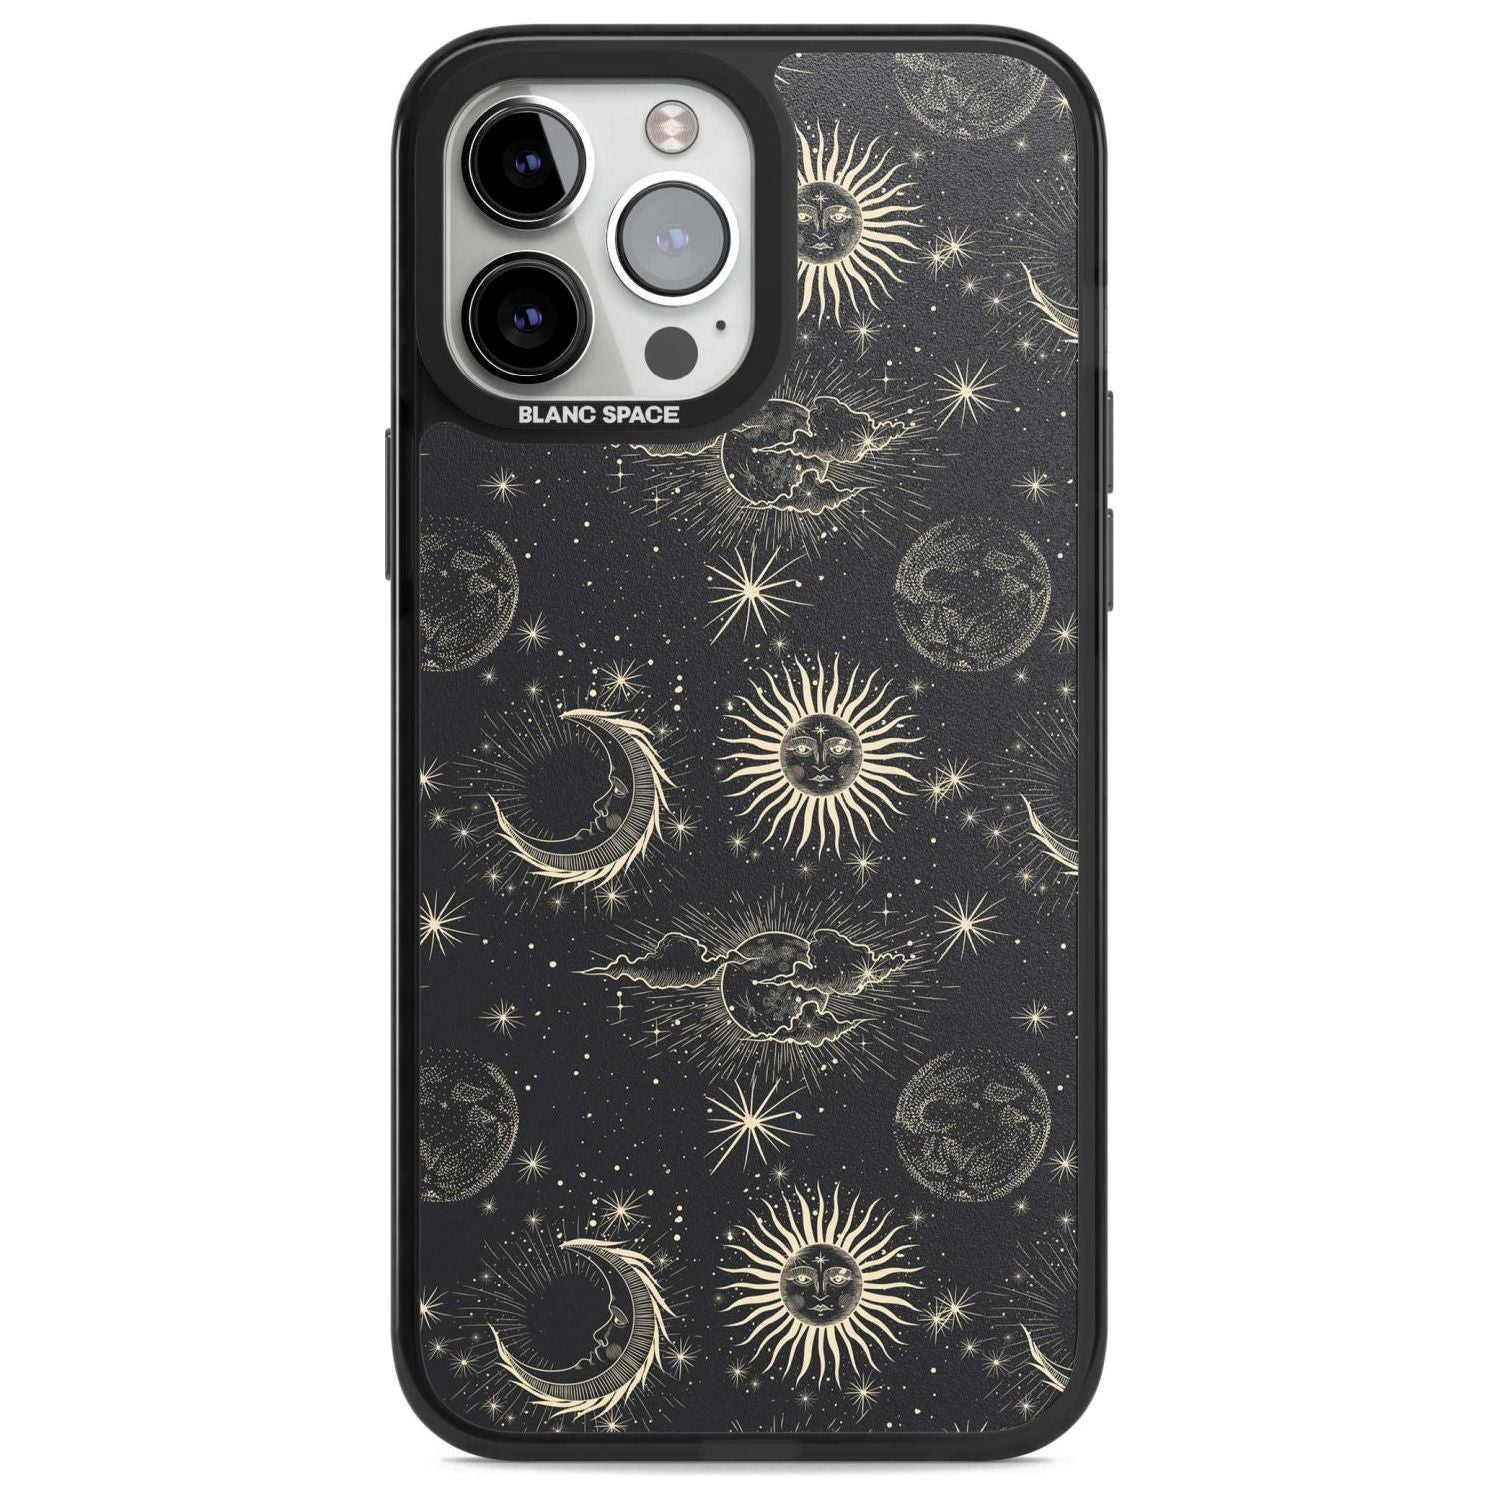 Large Suns, Moons & Clouds Astrological Phone Case iPhone 13 Pro Max / Magsafe Black Impact Case Blanc Space